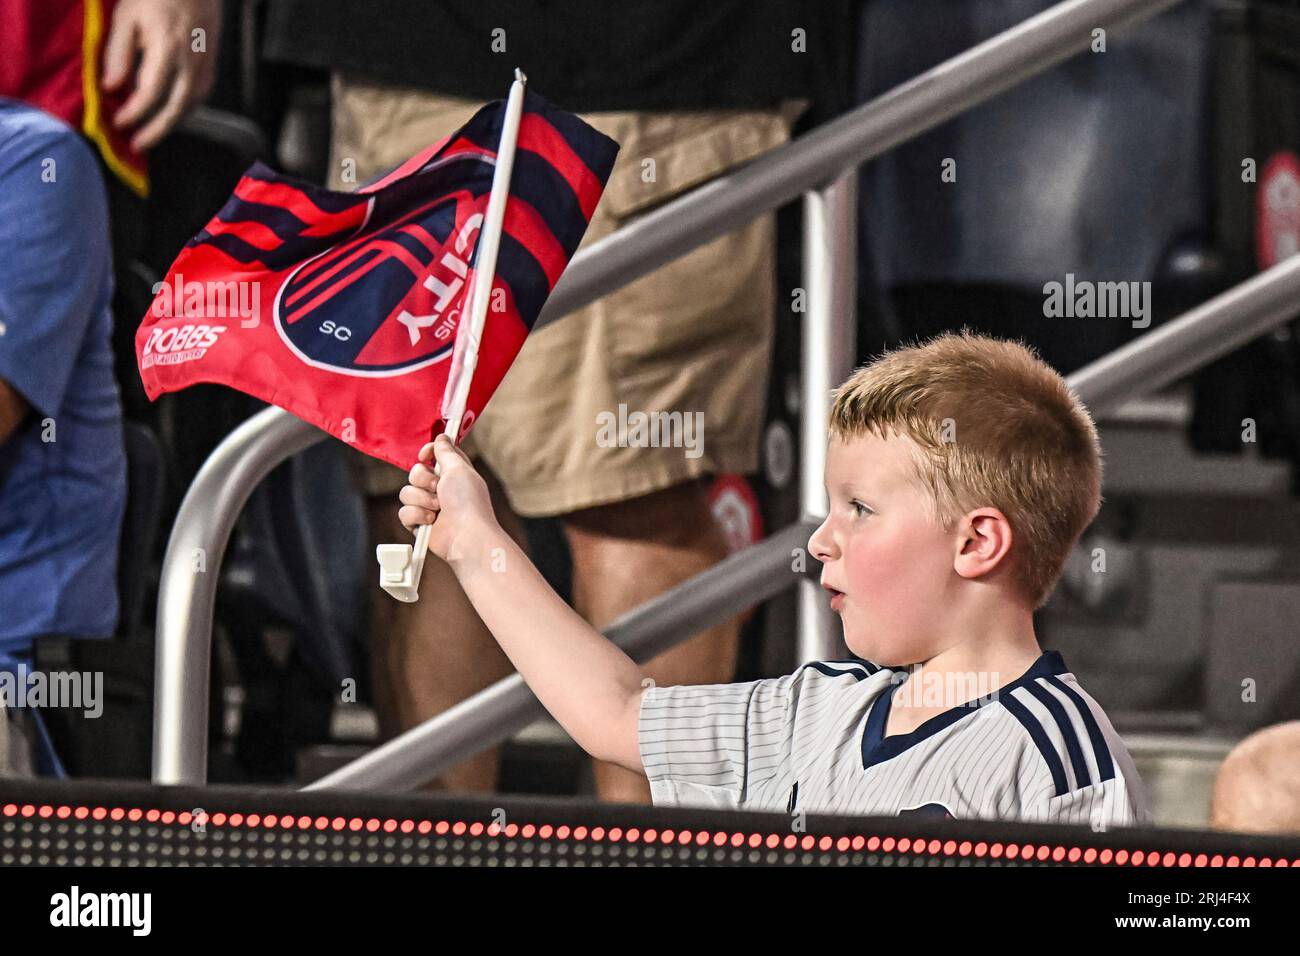 ST. LOUIS, MO - AUG 20: A young fan waives the window flag give